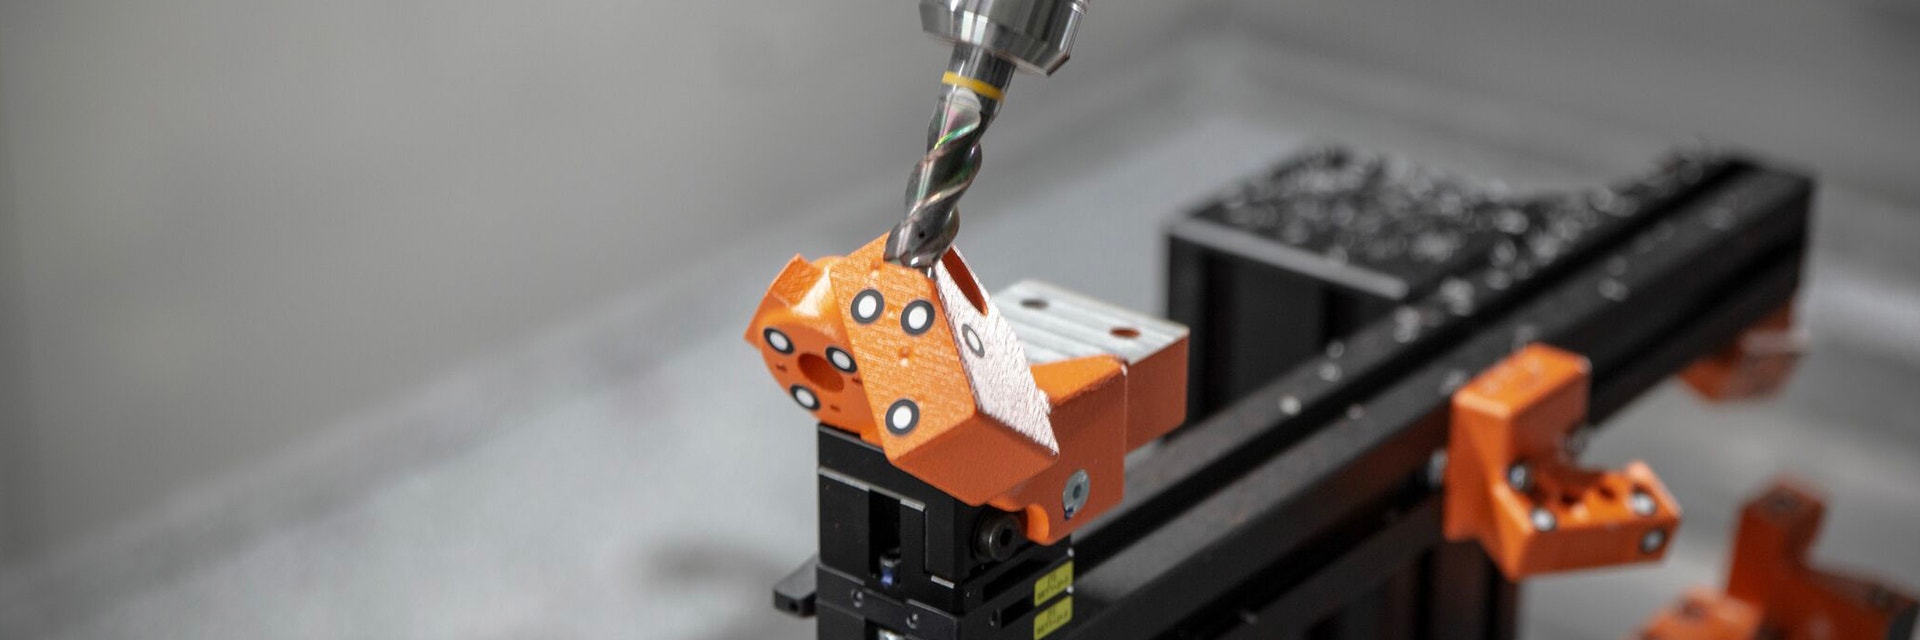 Close-up of RapidFit milling machine in action 